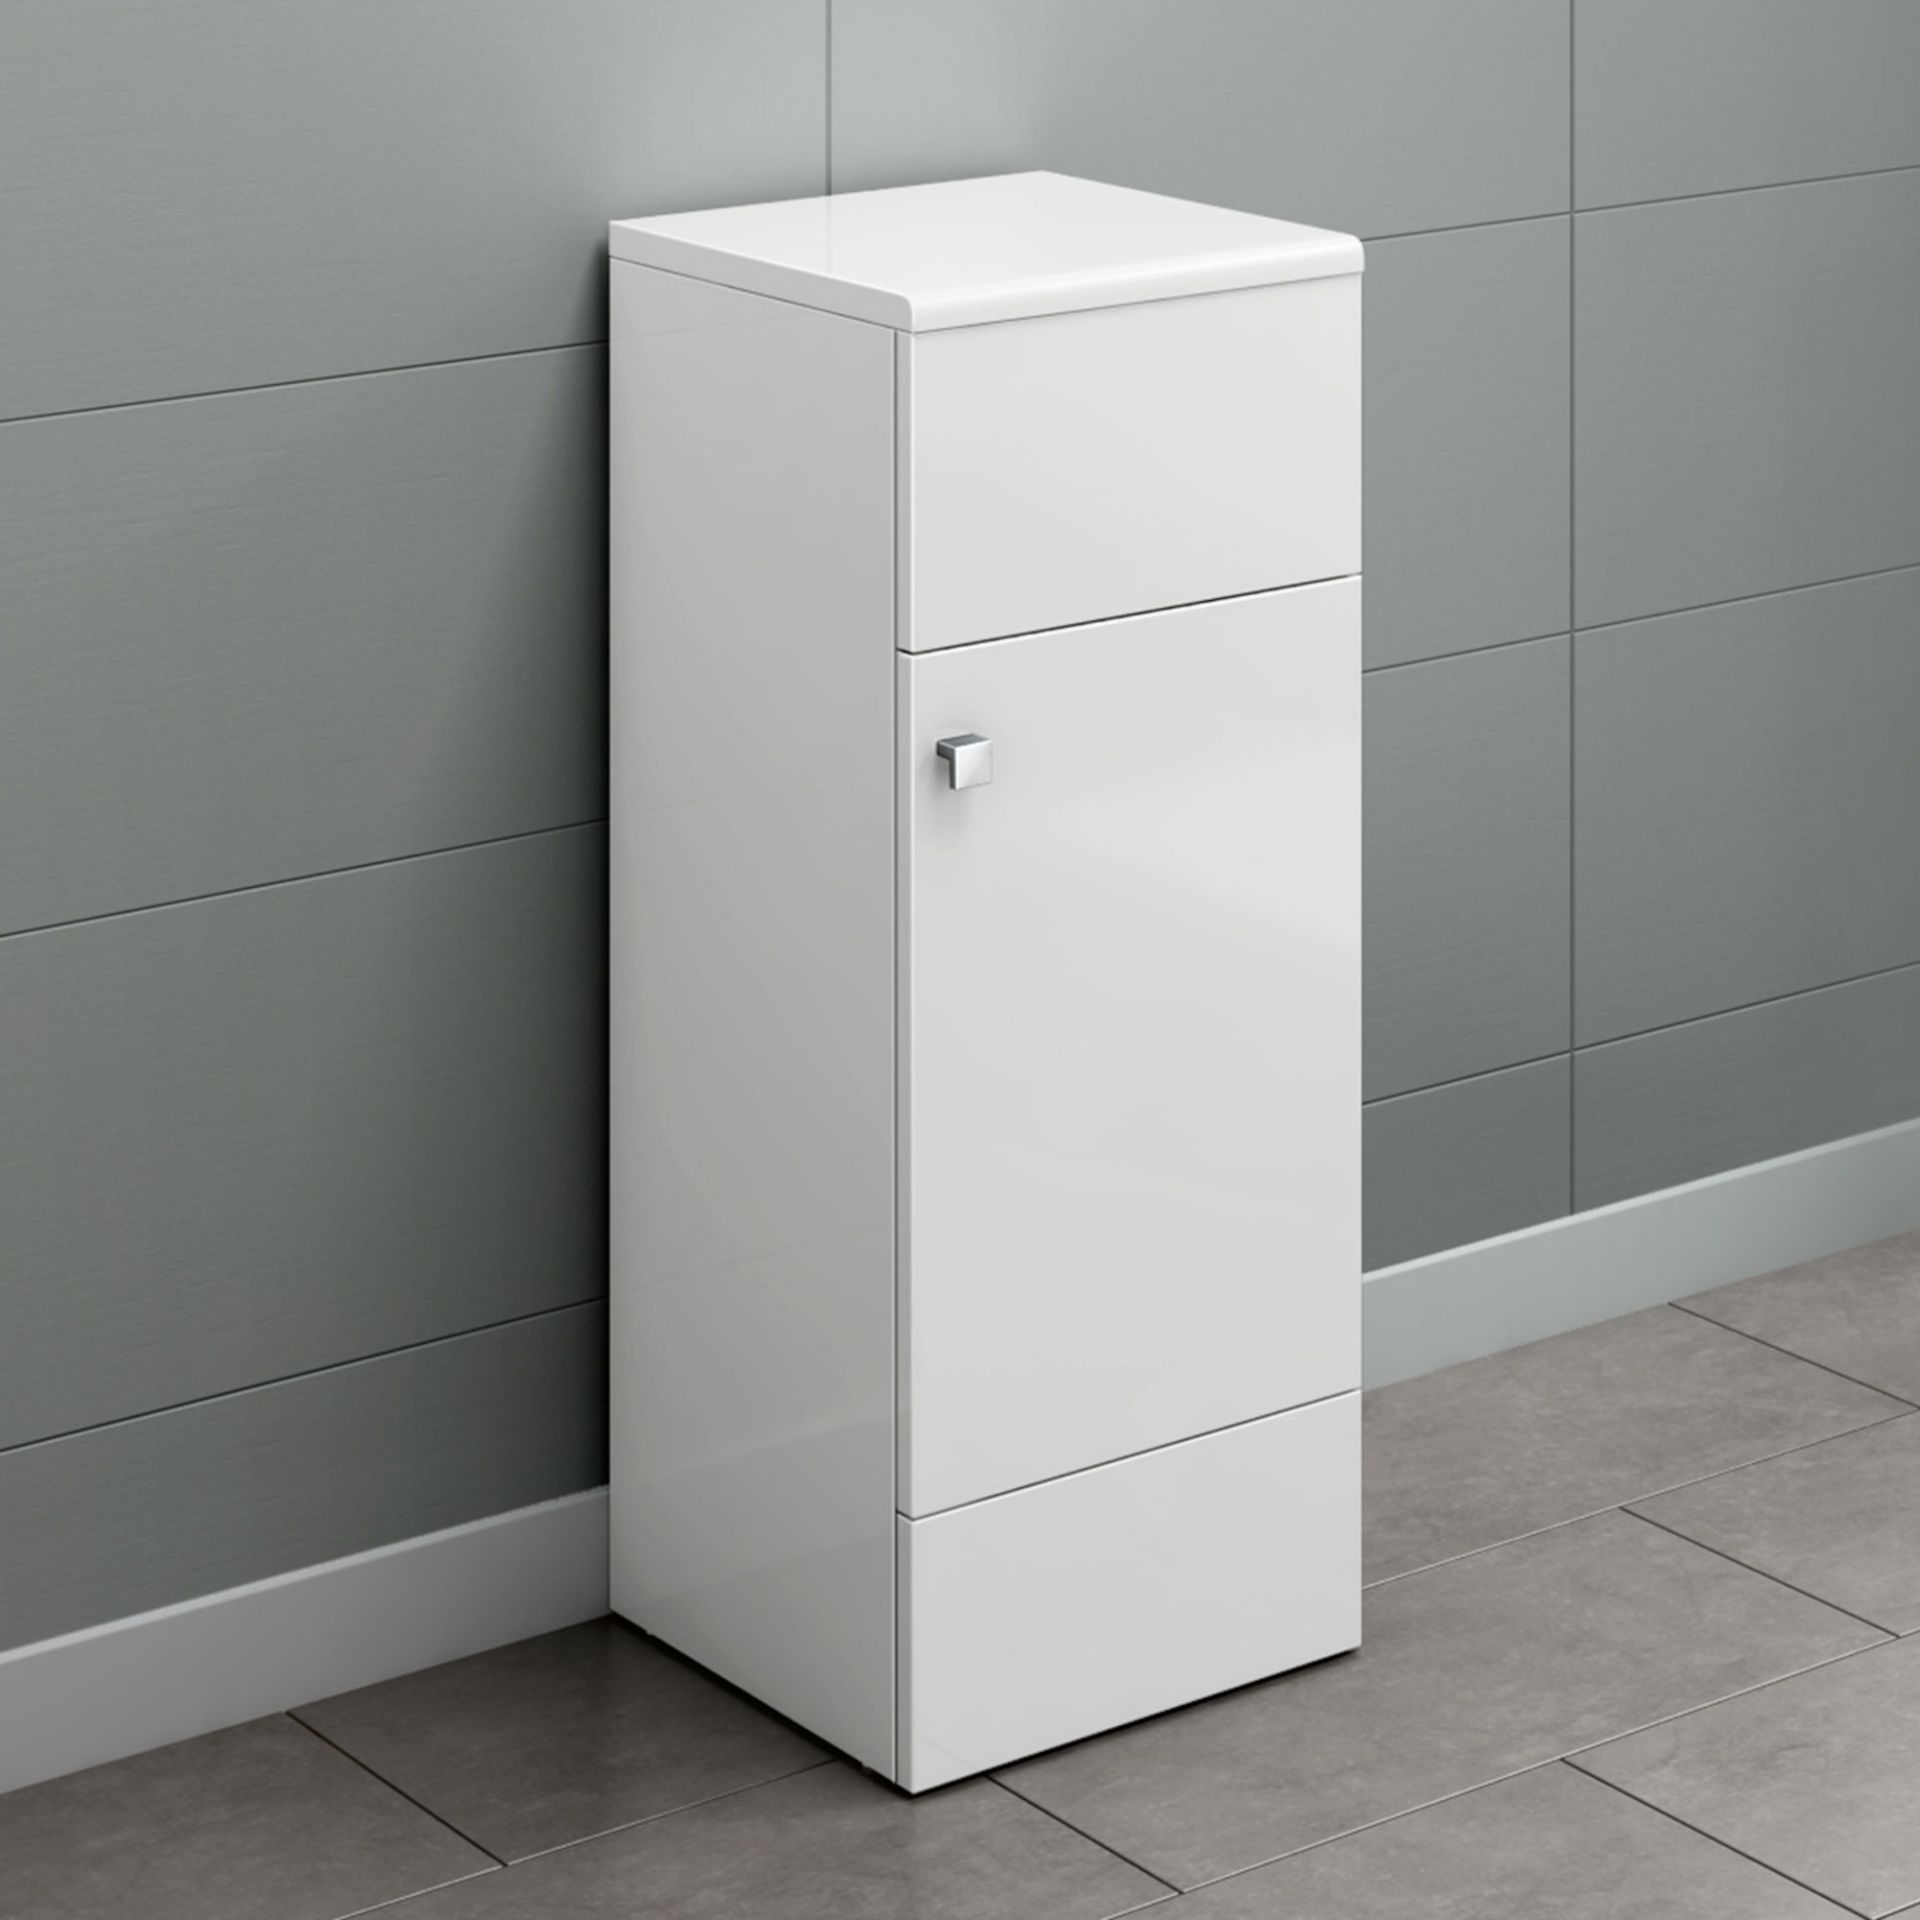 (TY83) 300mm Harper Gloss White Small Side Cabinet Unit. RRP £199.99. Our compact unit offers two